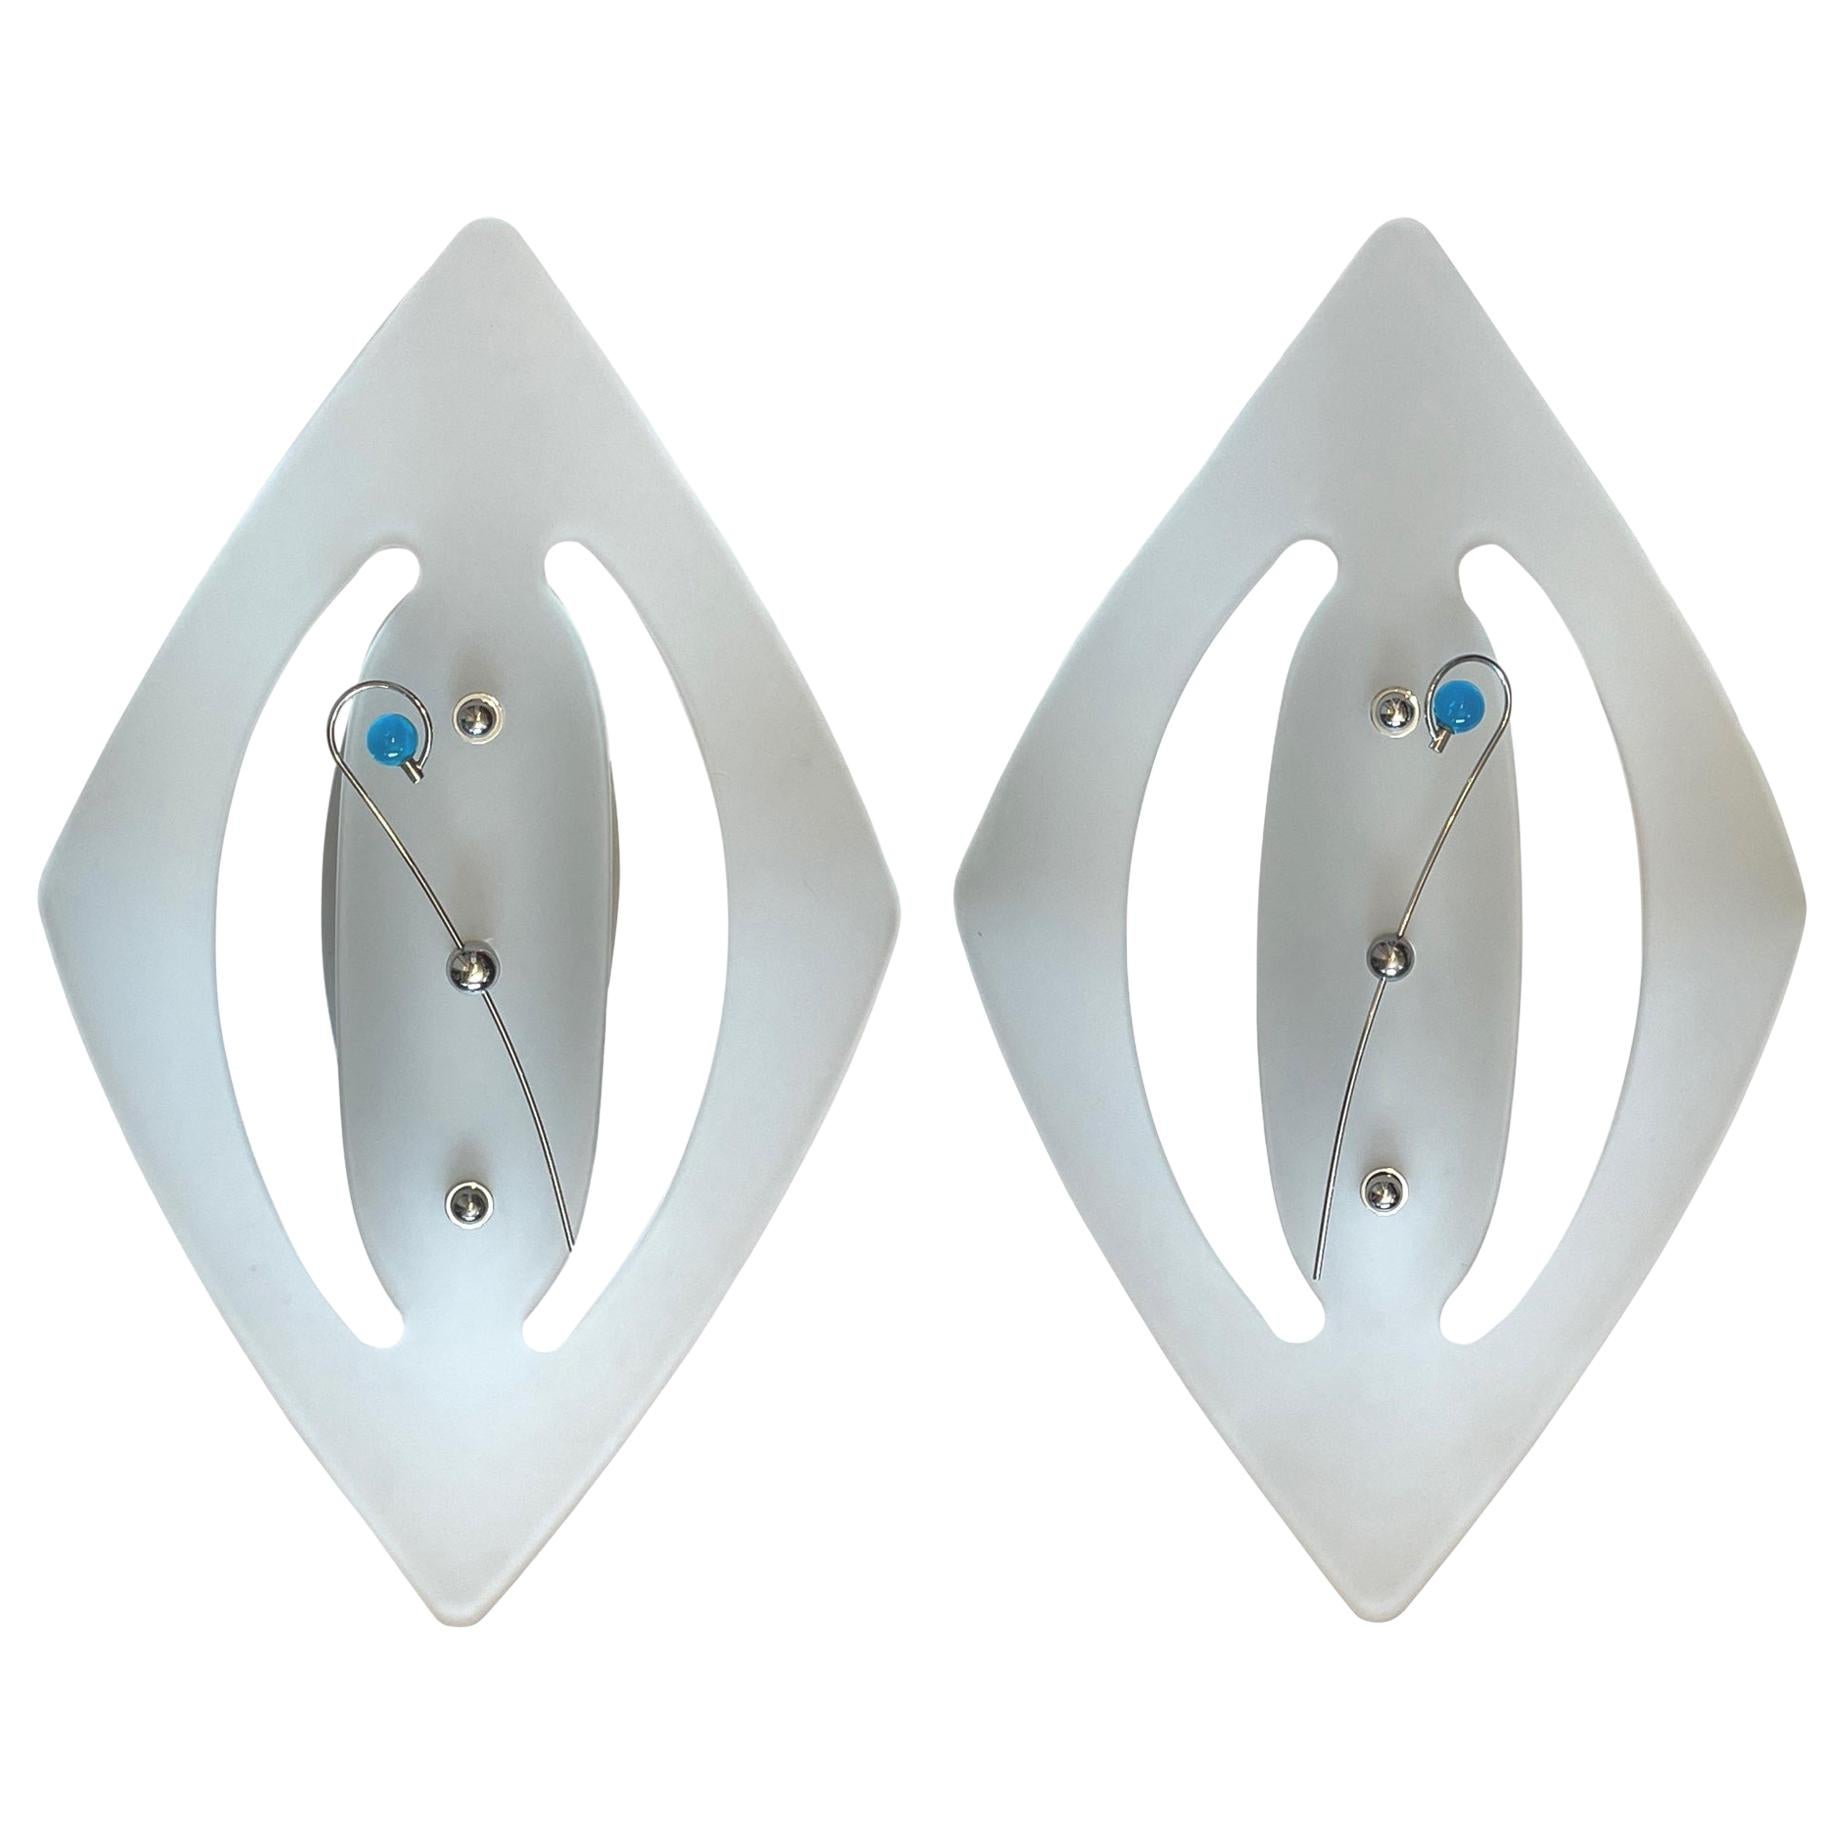 Pair of Monumental Modern Italian Sconces by Zonca Voghera, Italy, 1980s